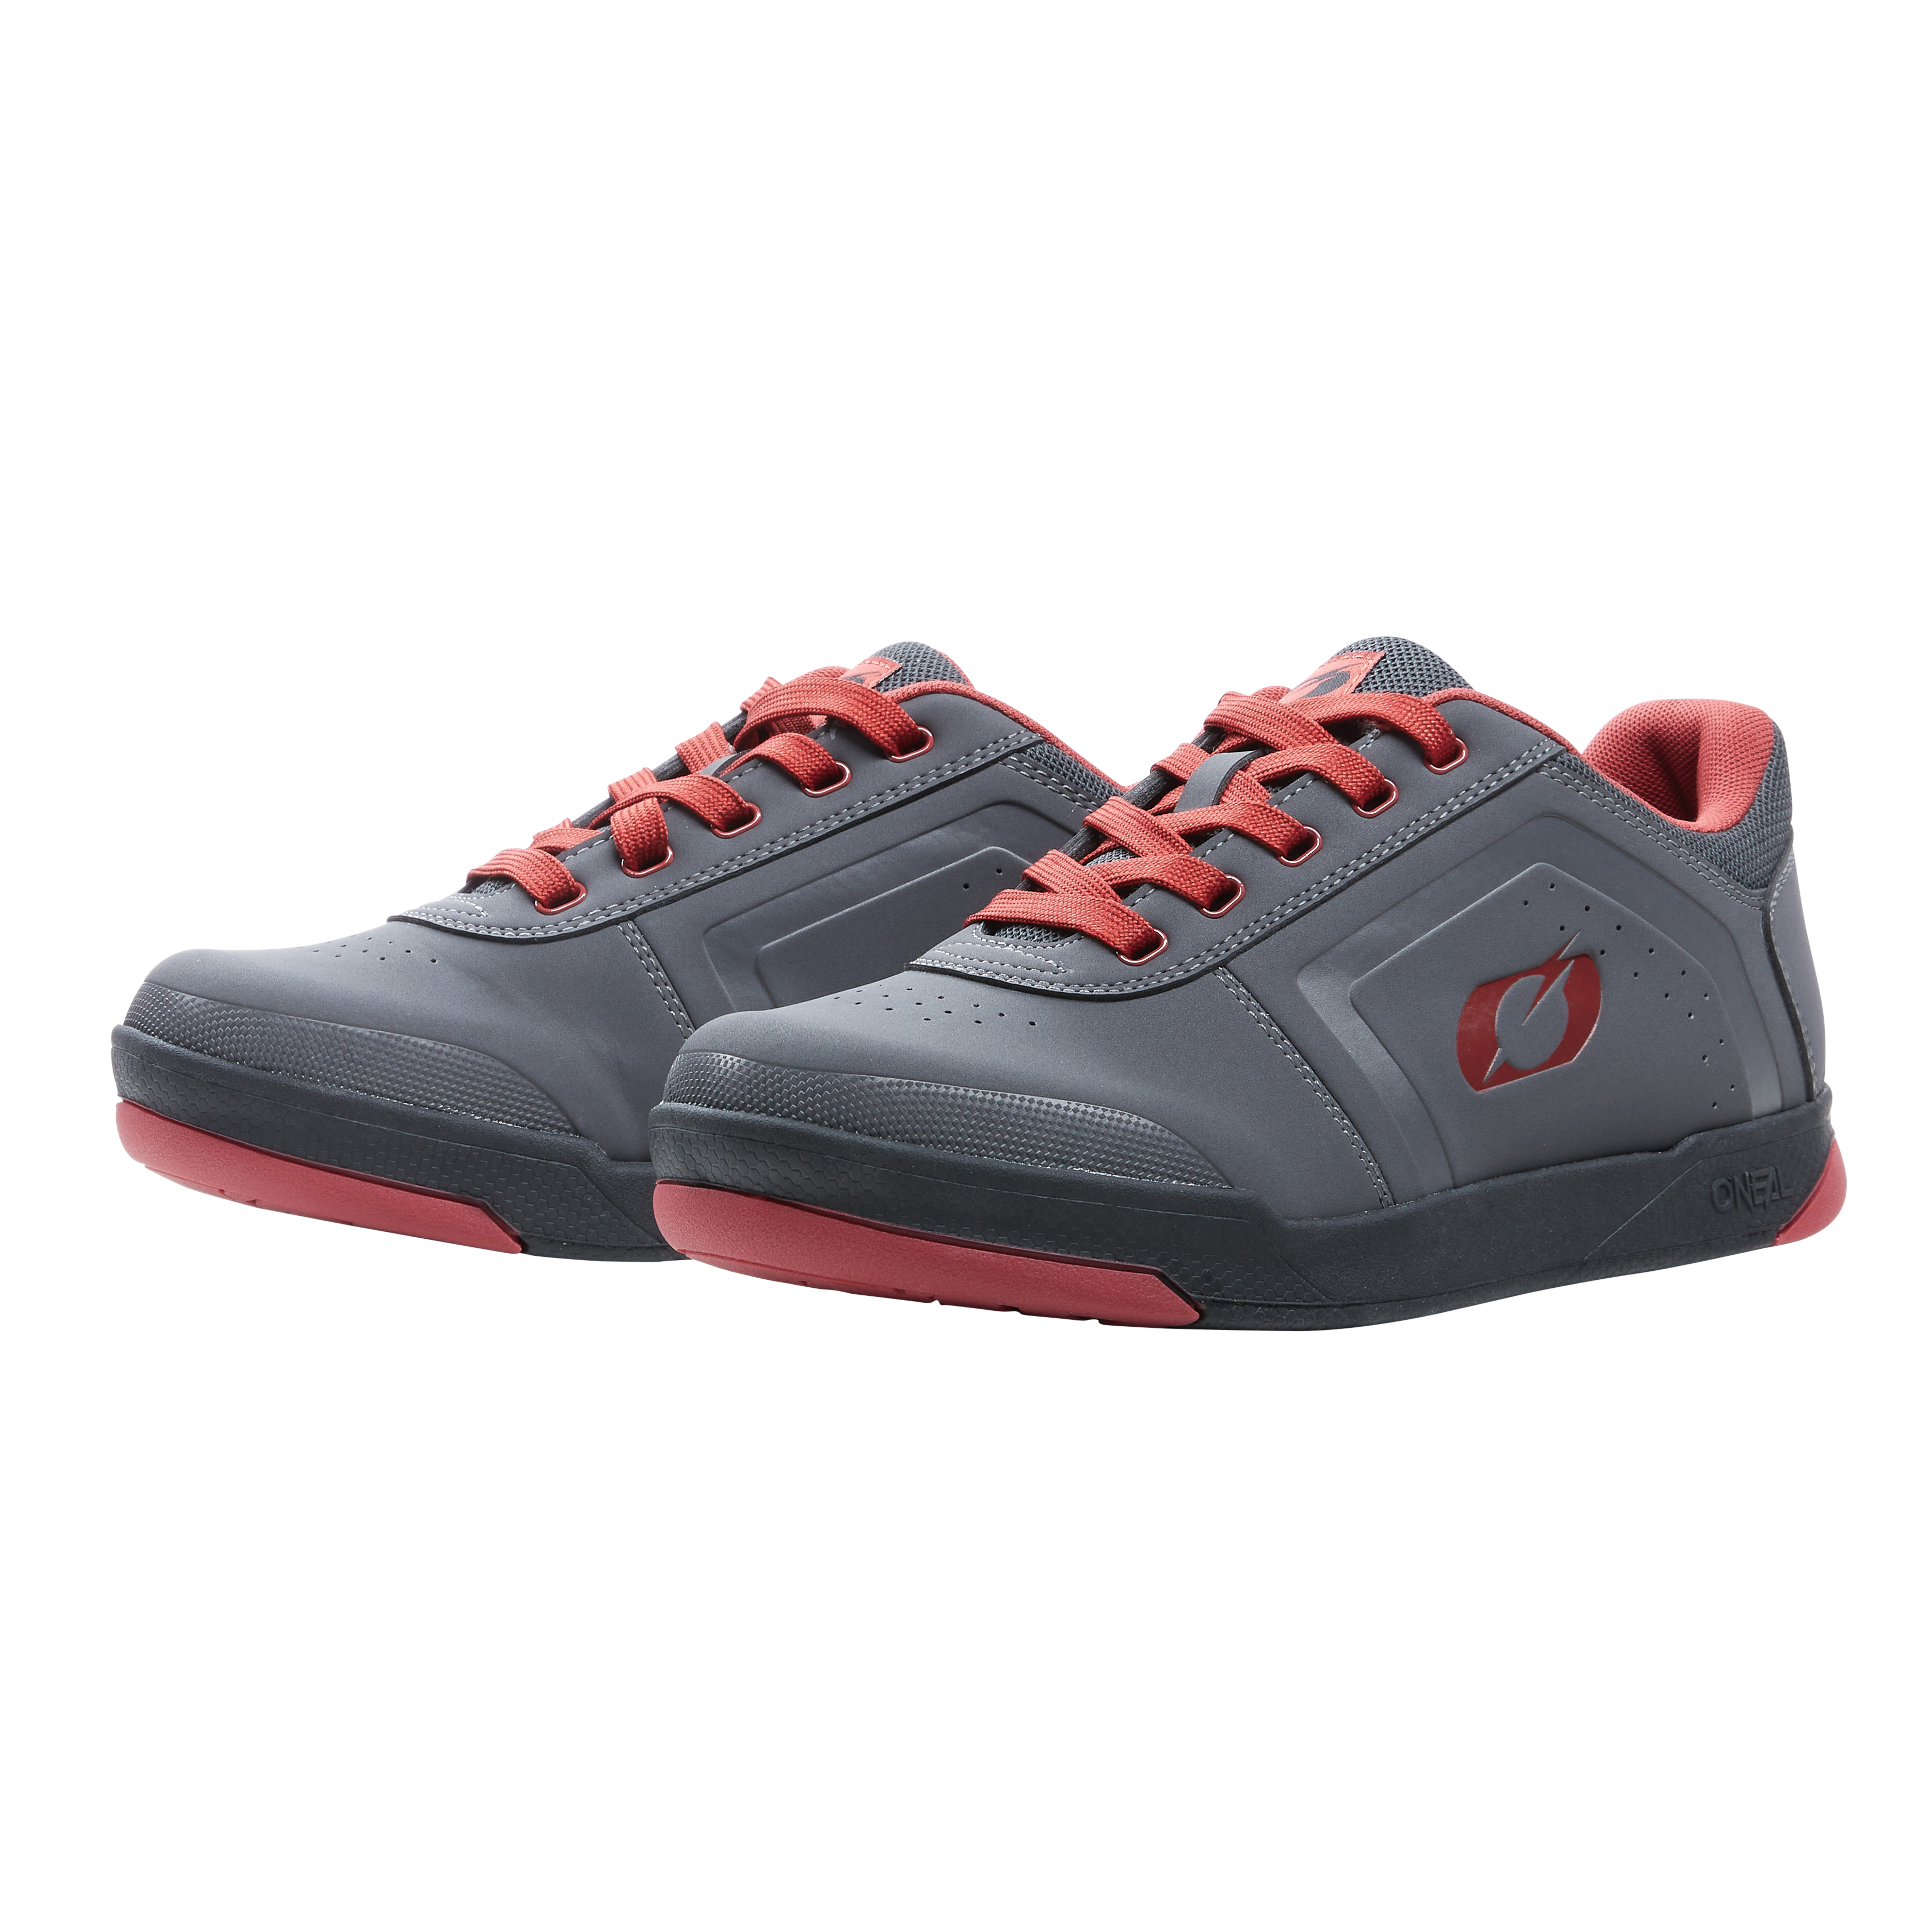 CYCLING SHOES – ONEAL USA